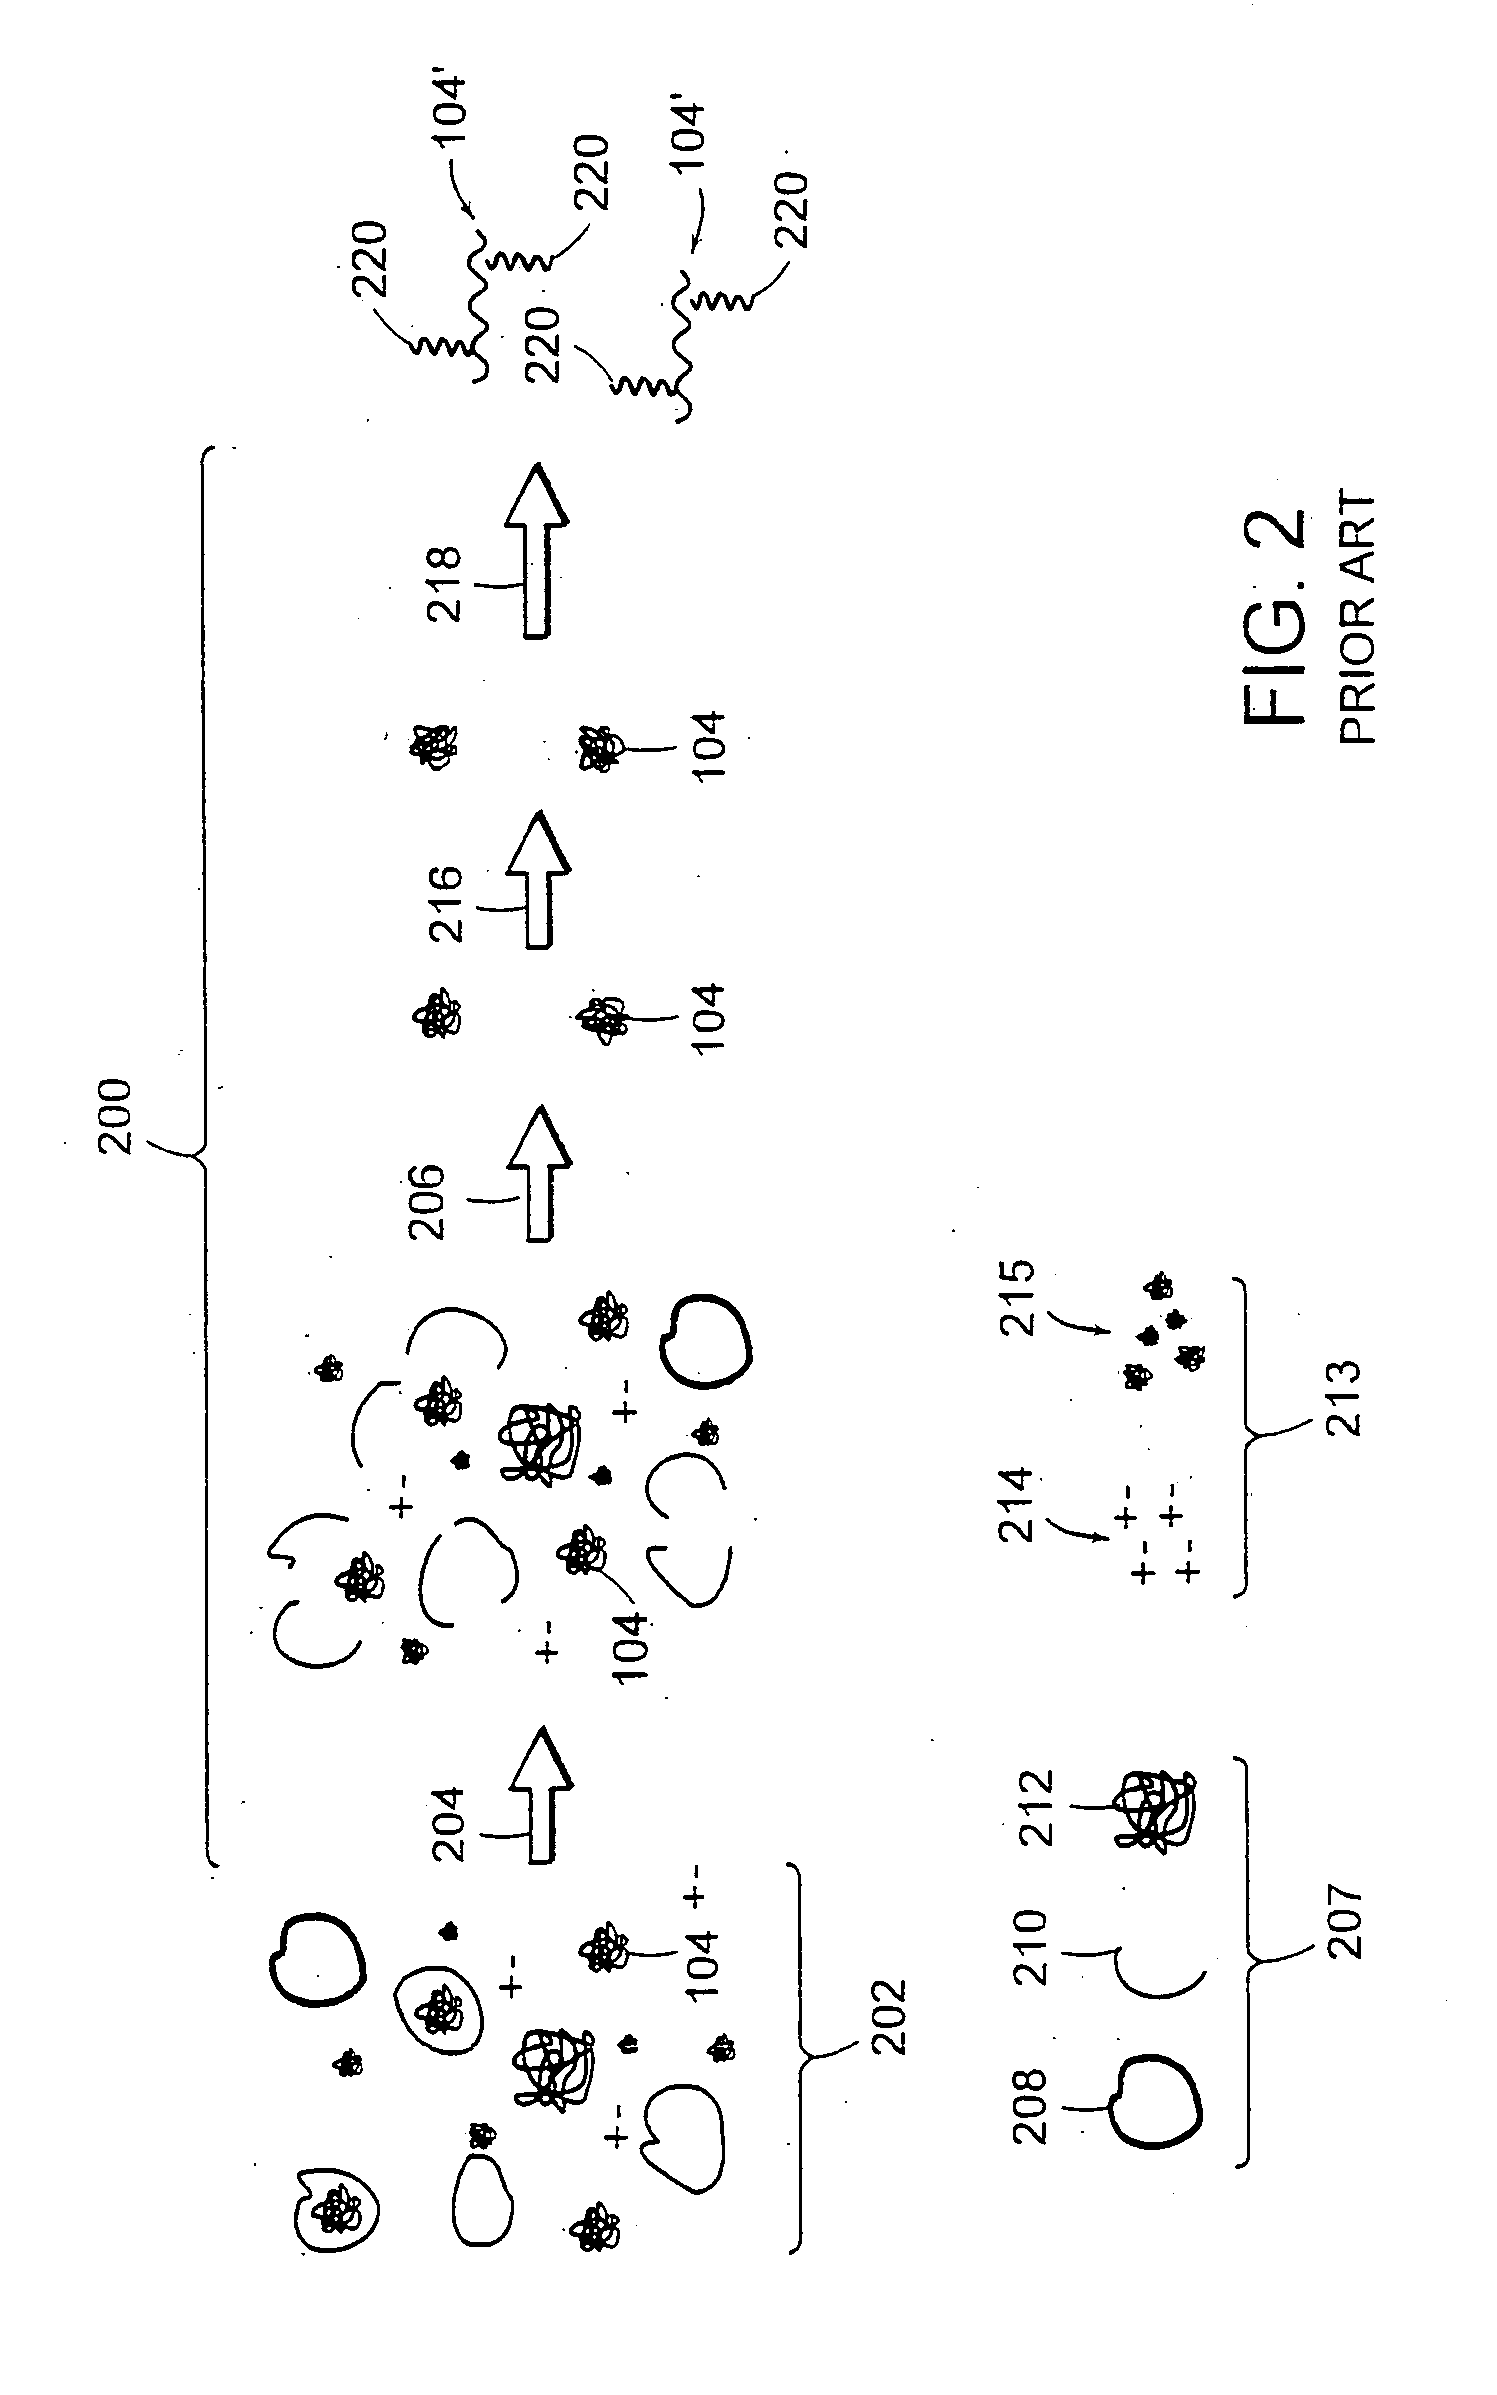 Fluid interface for bioprocessor systems